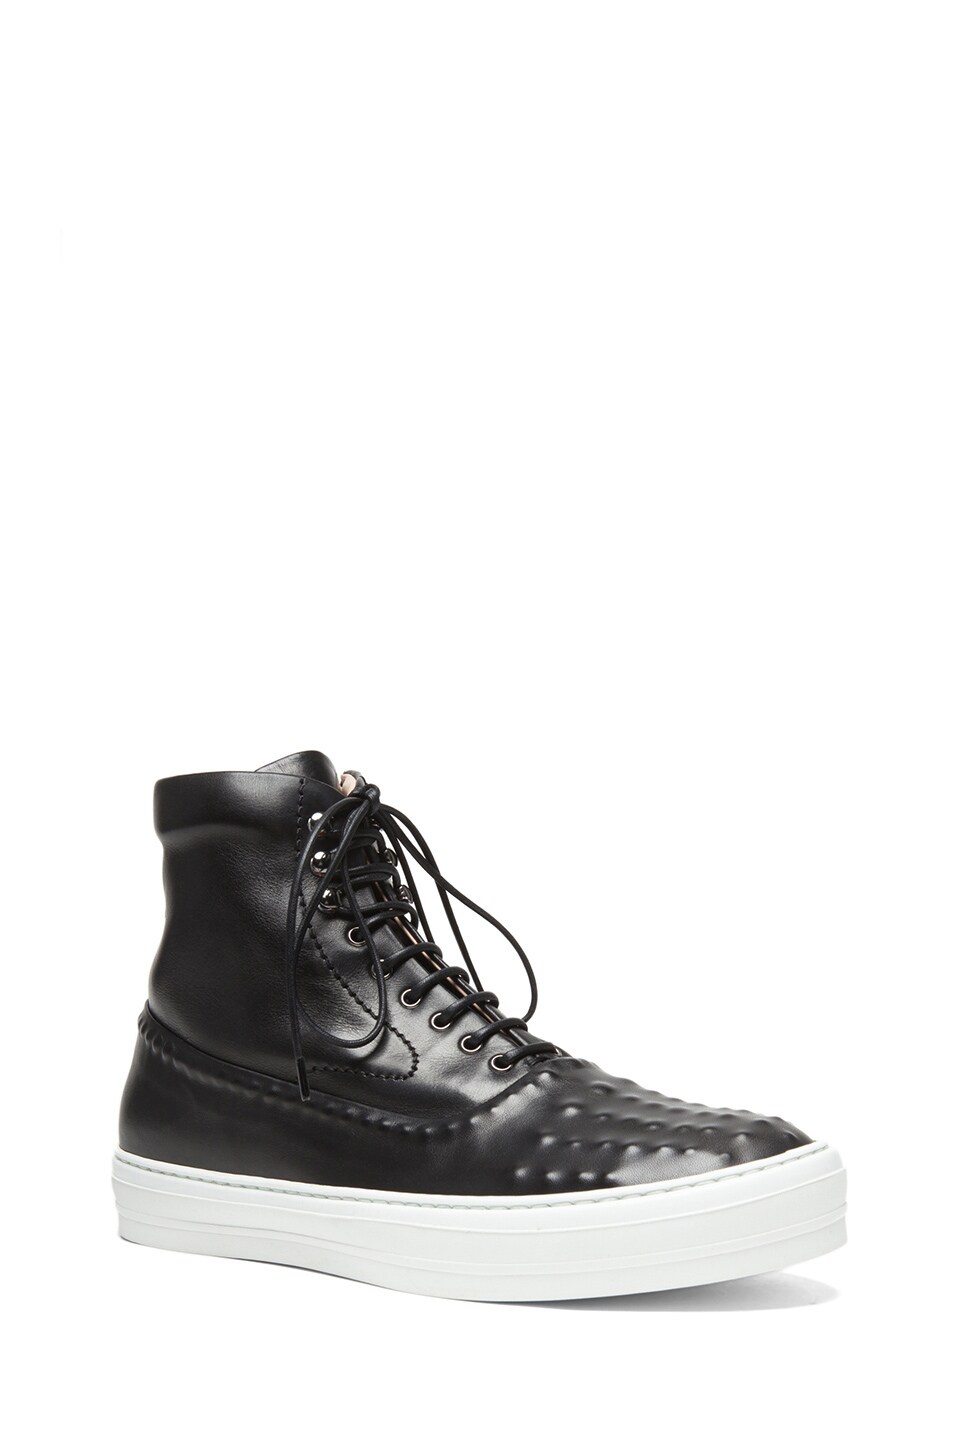 Image 1 of Alexander McQueen Illinois High Top Leather Sneakers in Black